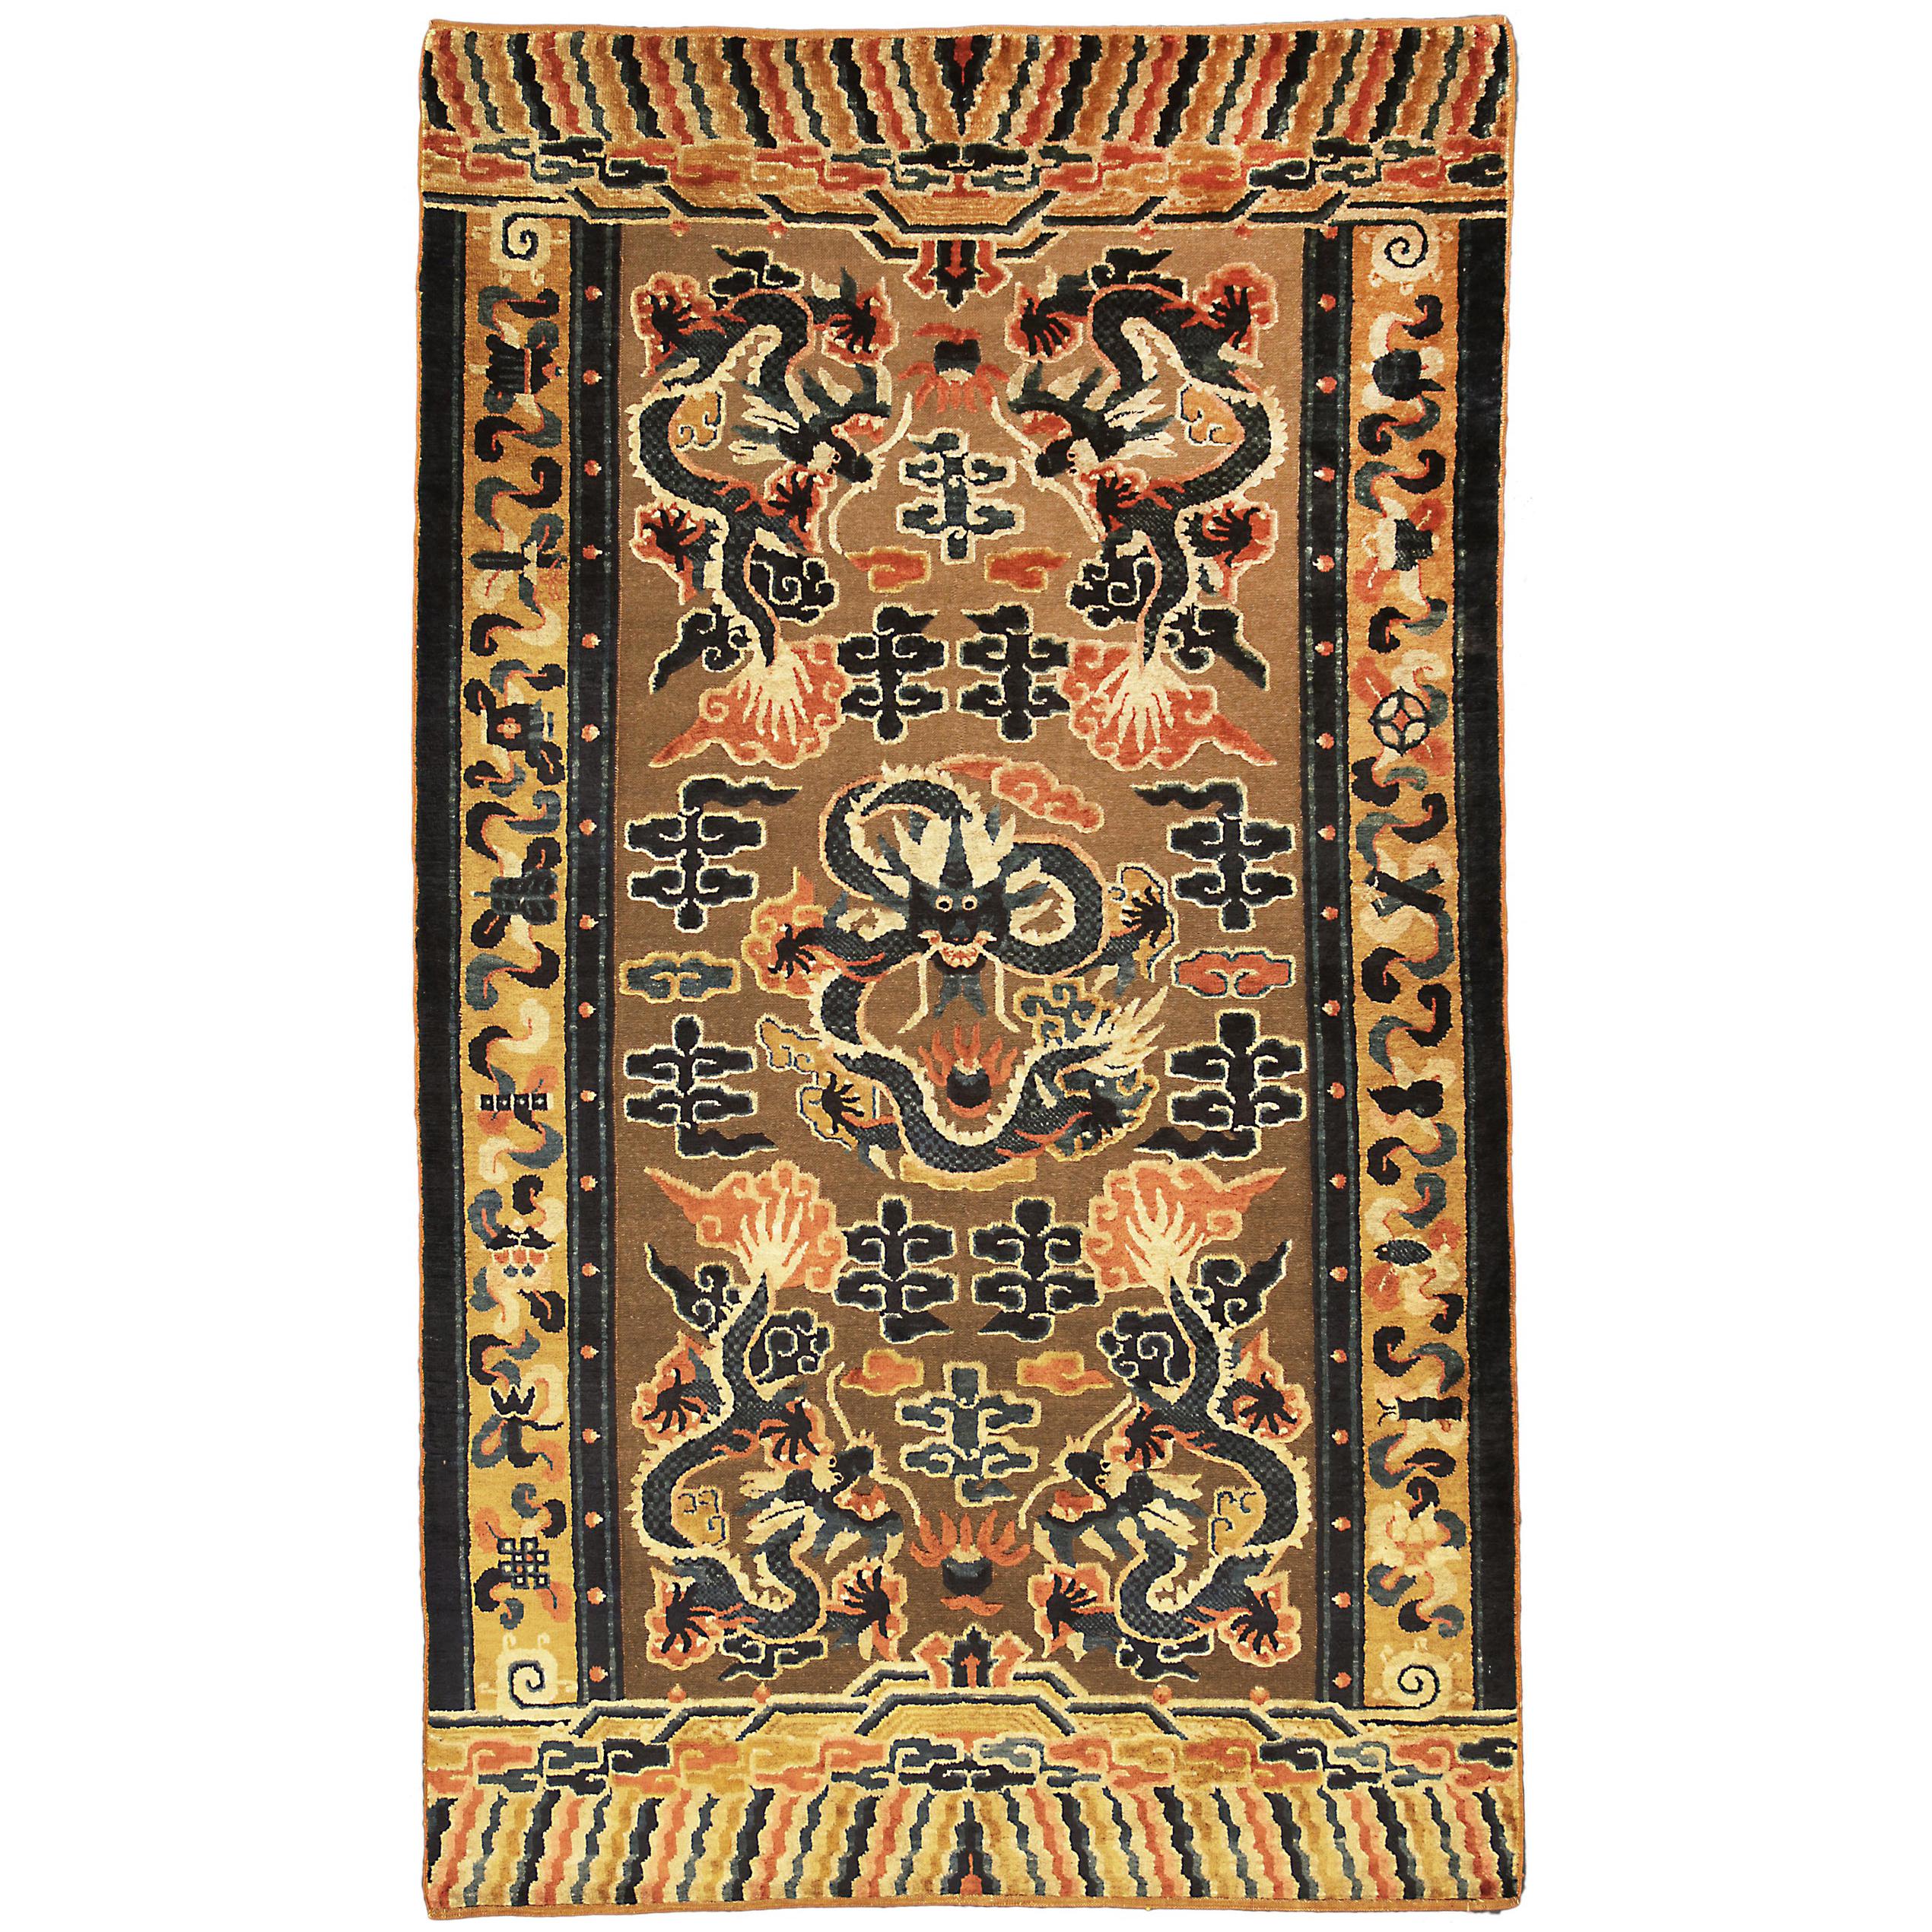 Ningxia Brown Metal-Thread Imperial Palace Souf Chinese Rug aus dem 19.